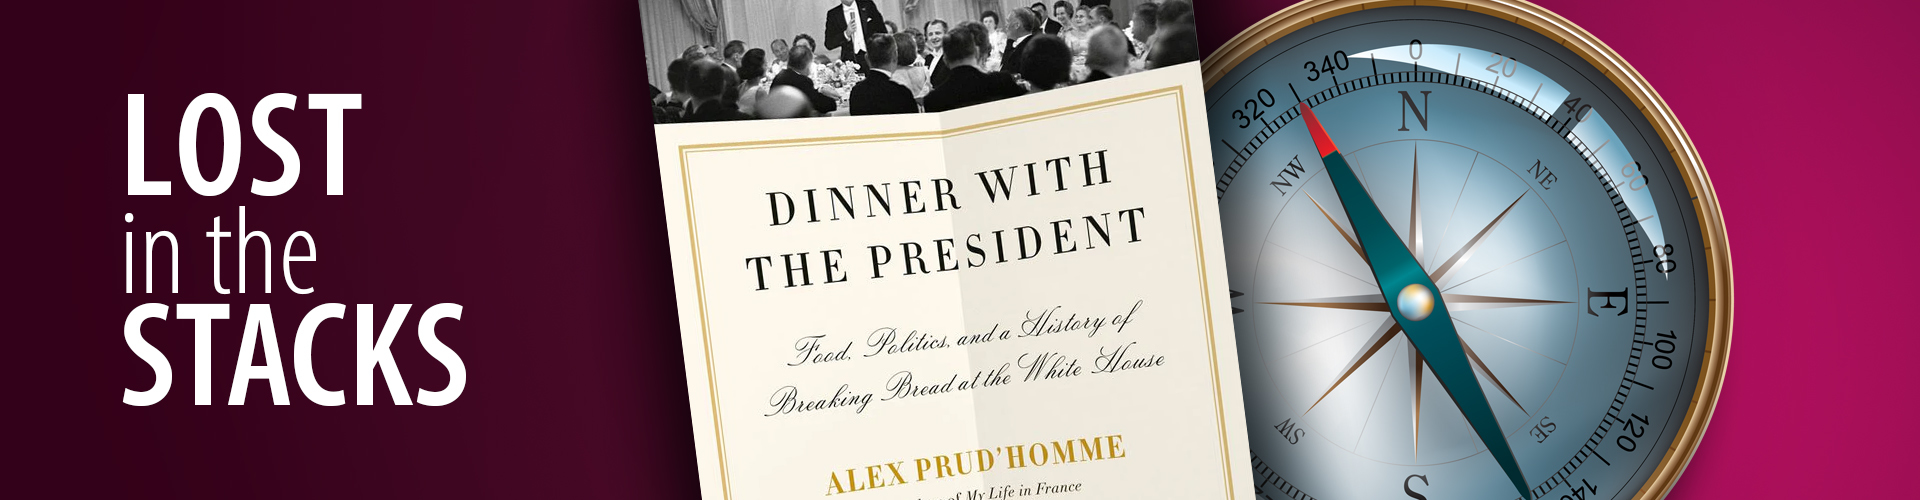 dinner with the president 1920x500